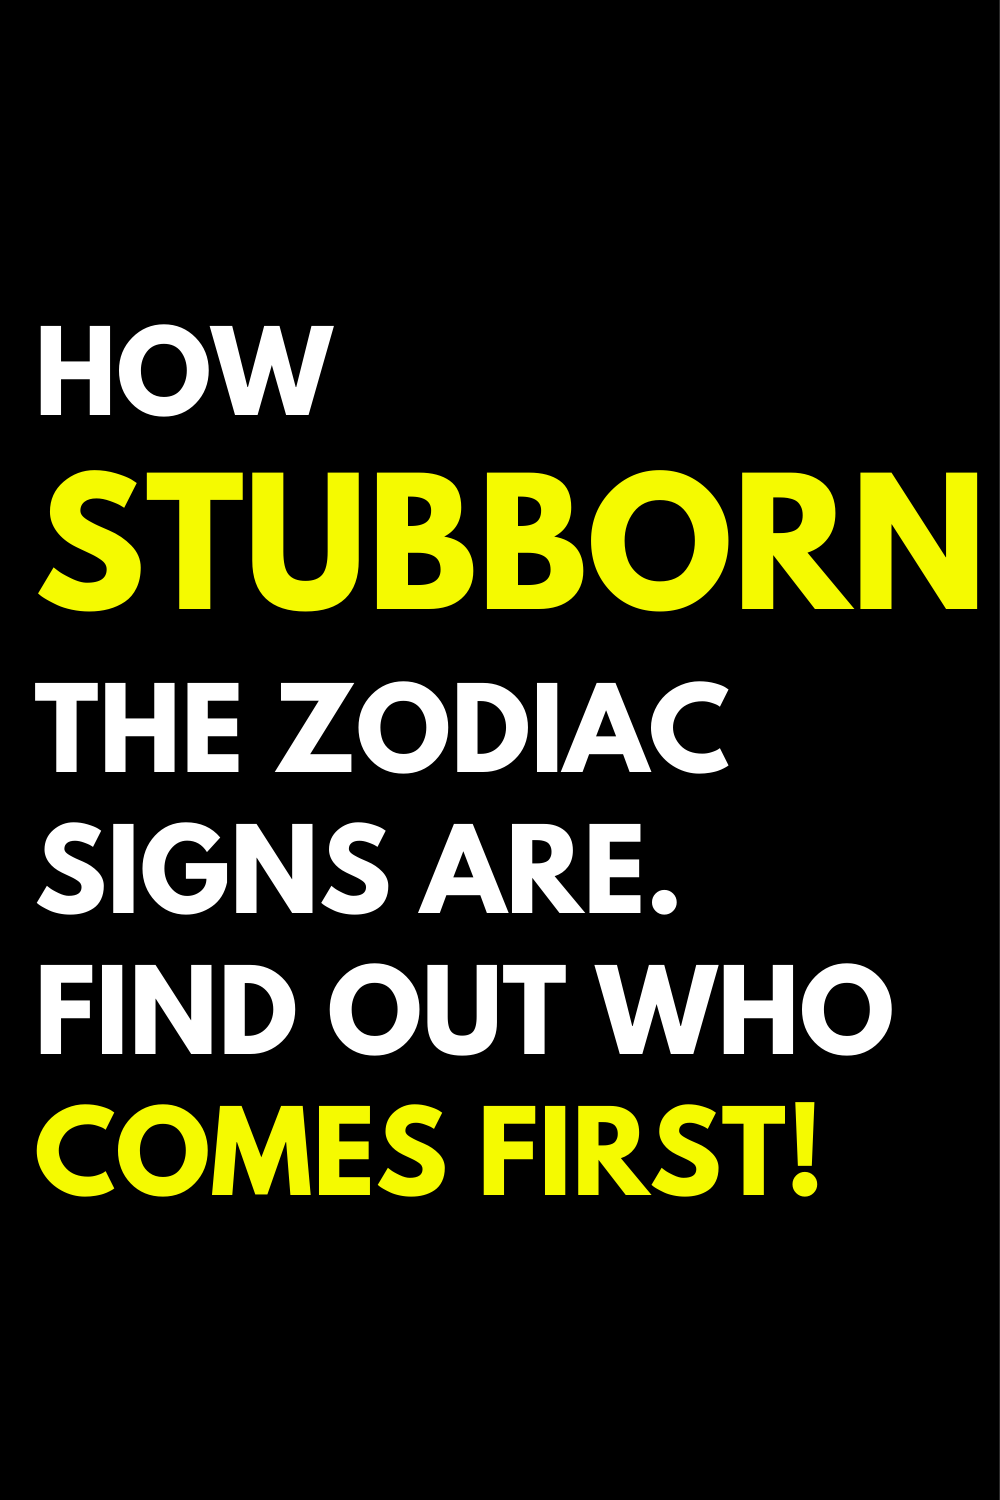 How stubborn the zodiac signs are. Find out who comes first!